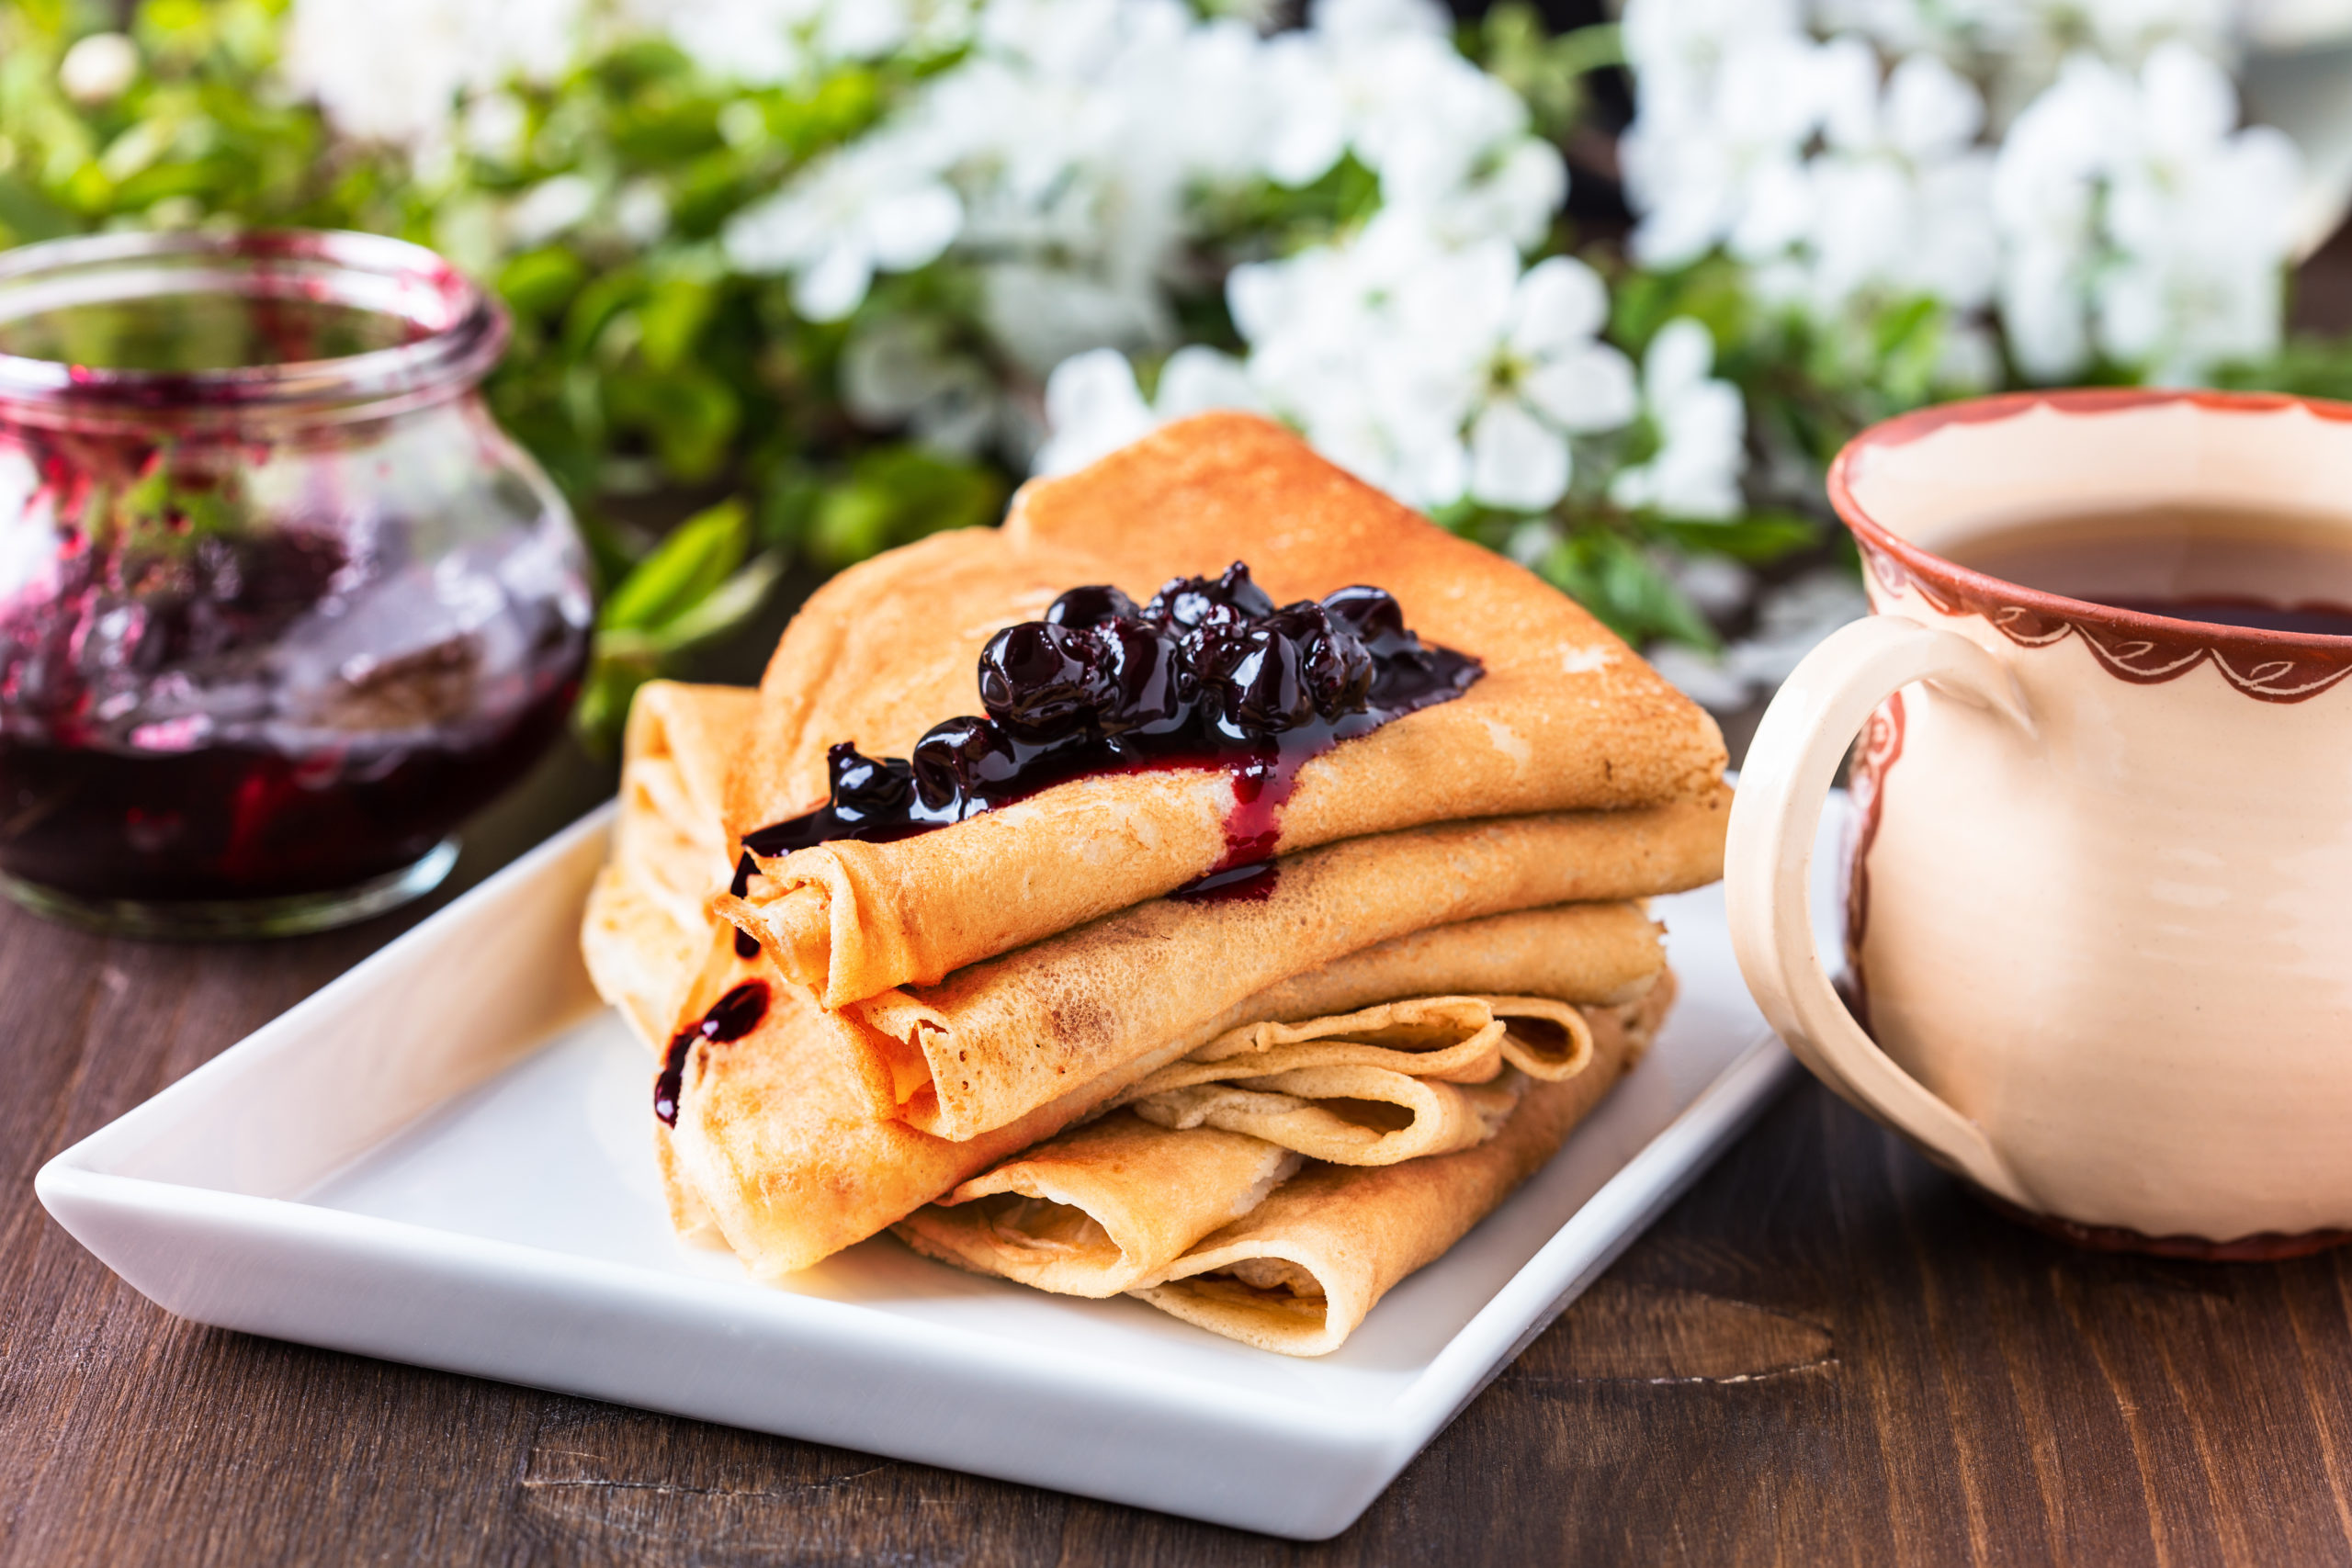 Crepes  folded in triangles with currant jam